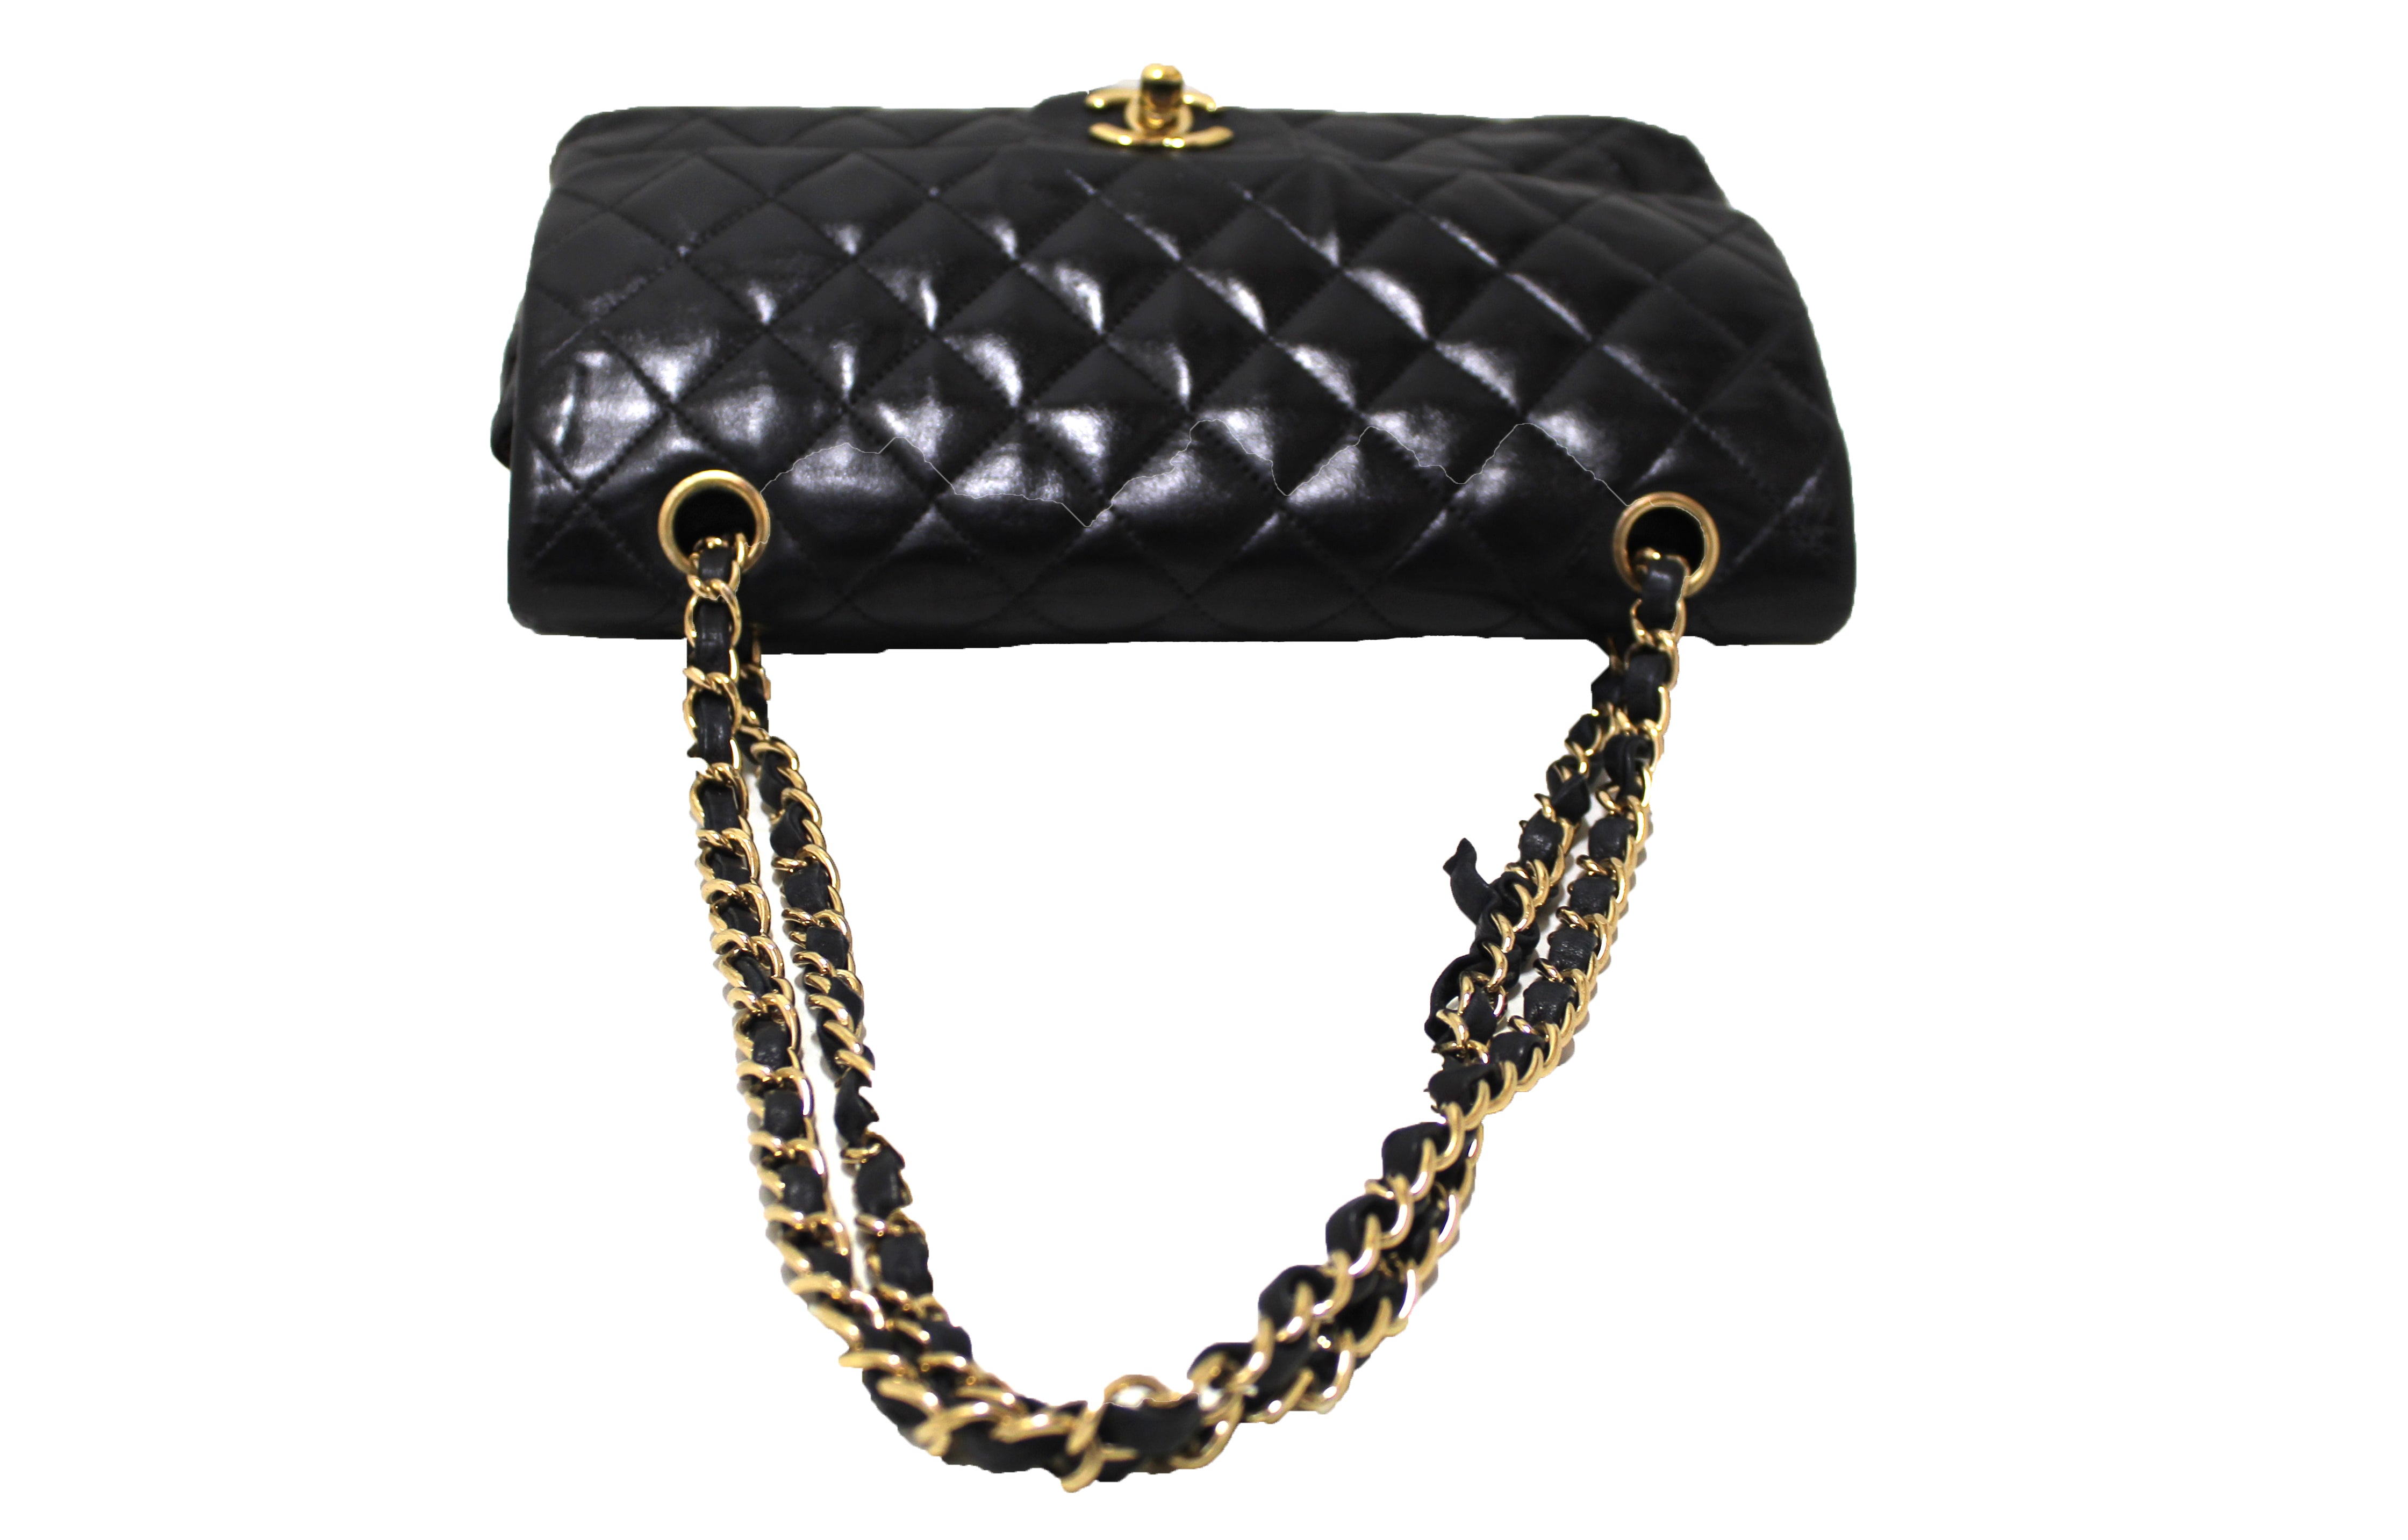 pre owned chanel bags for women